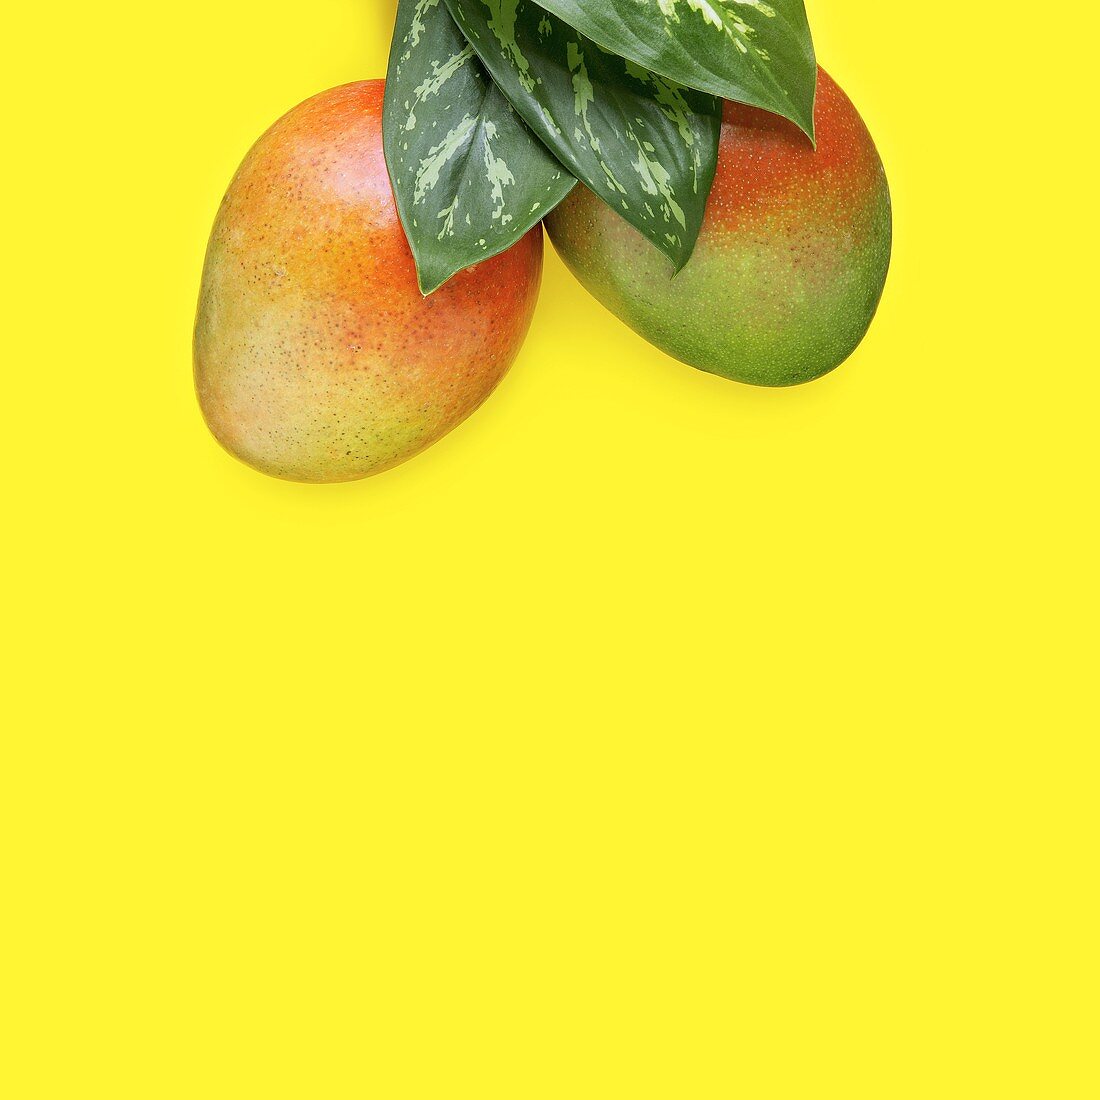 Mangos with Leaves on a Yellow Background